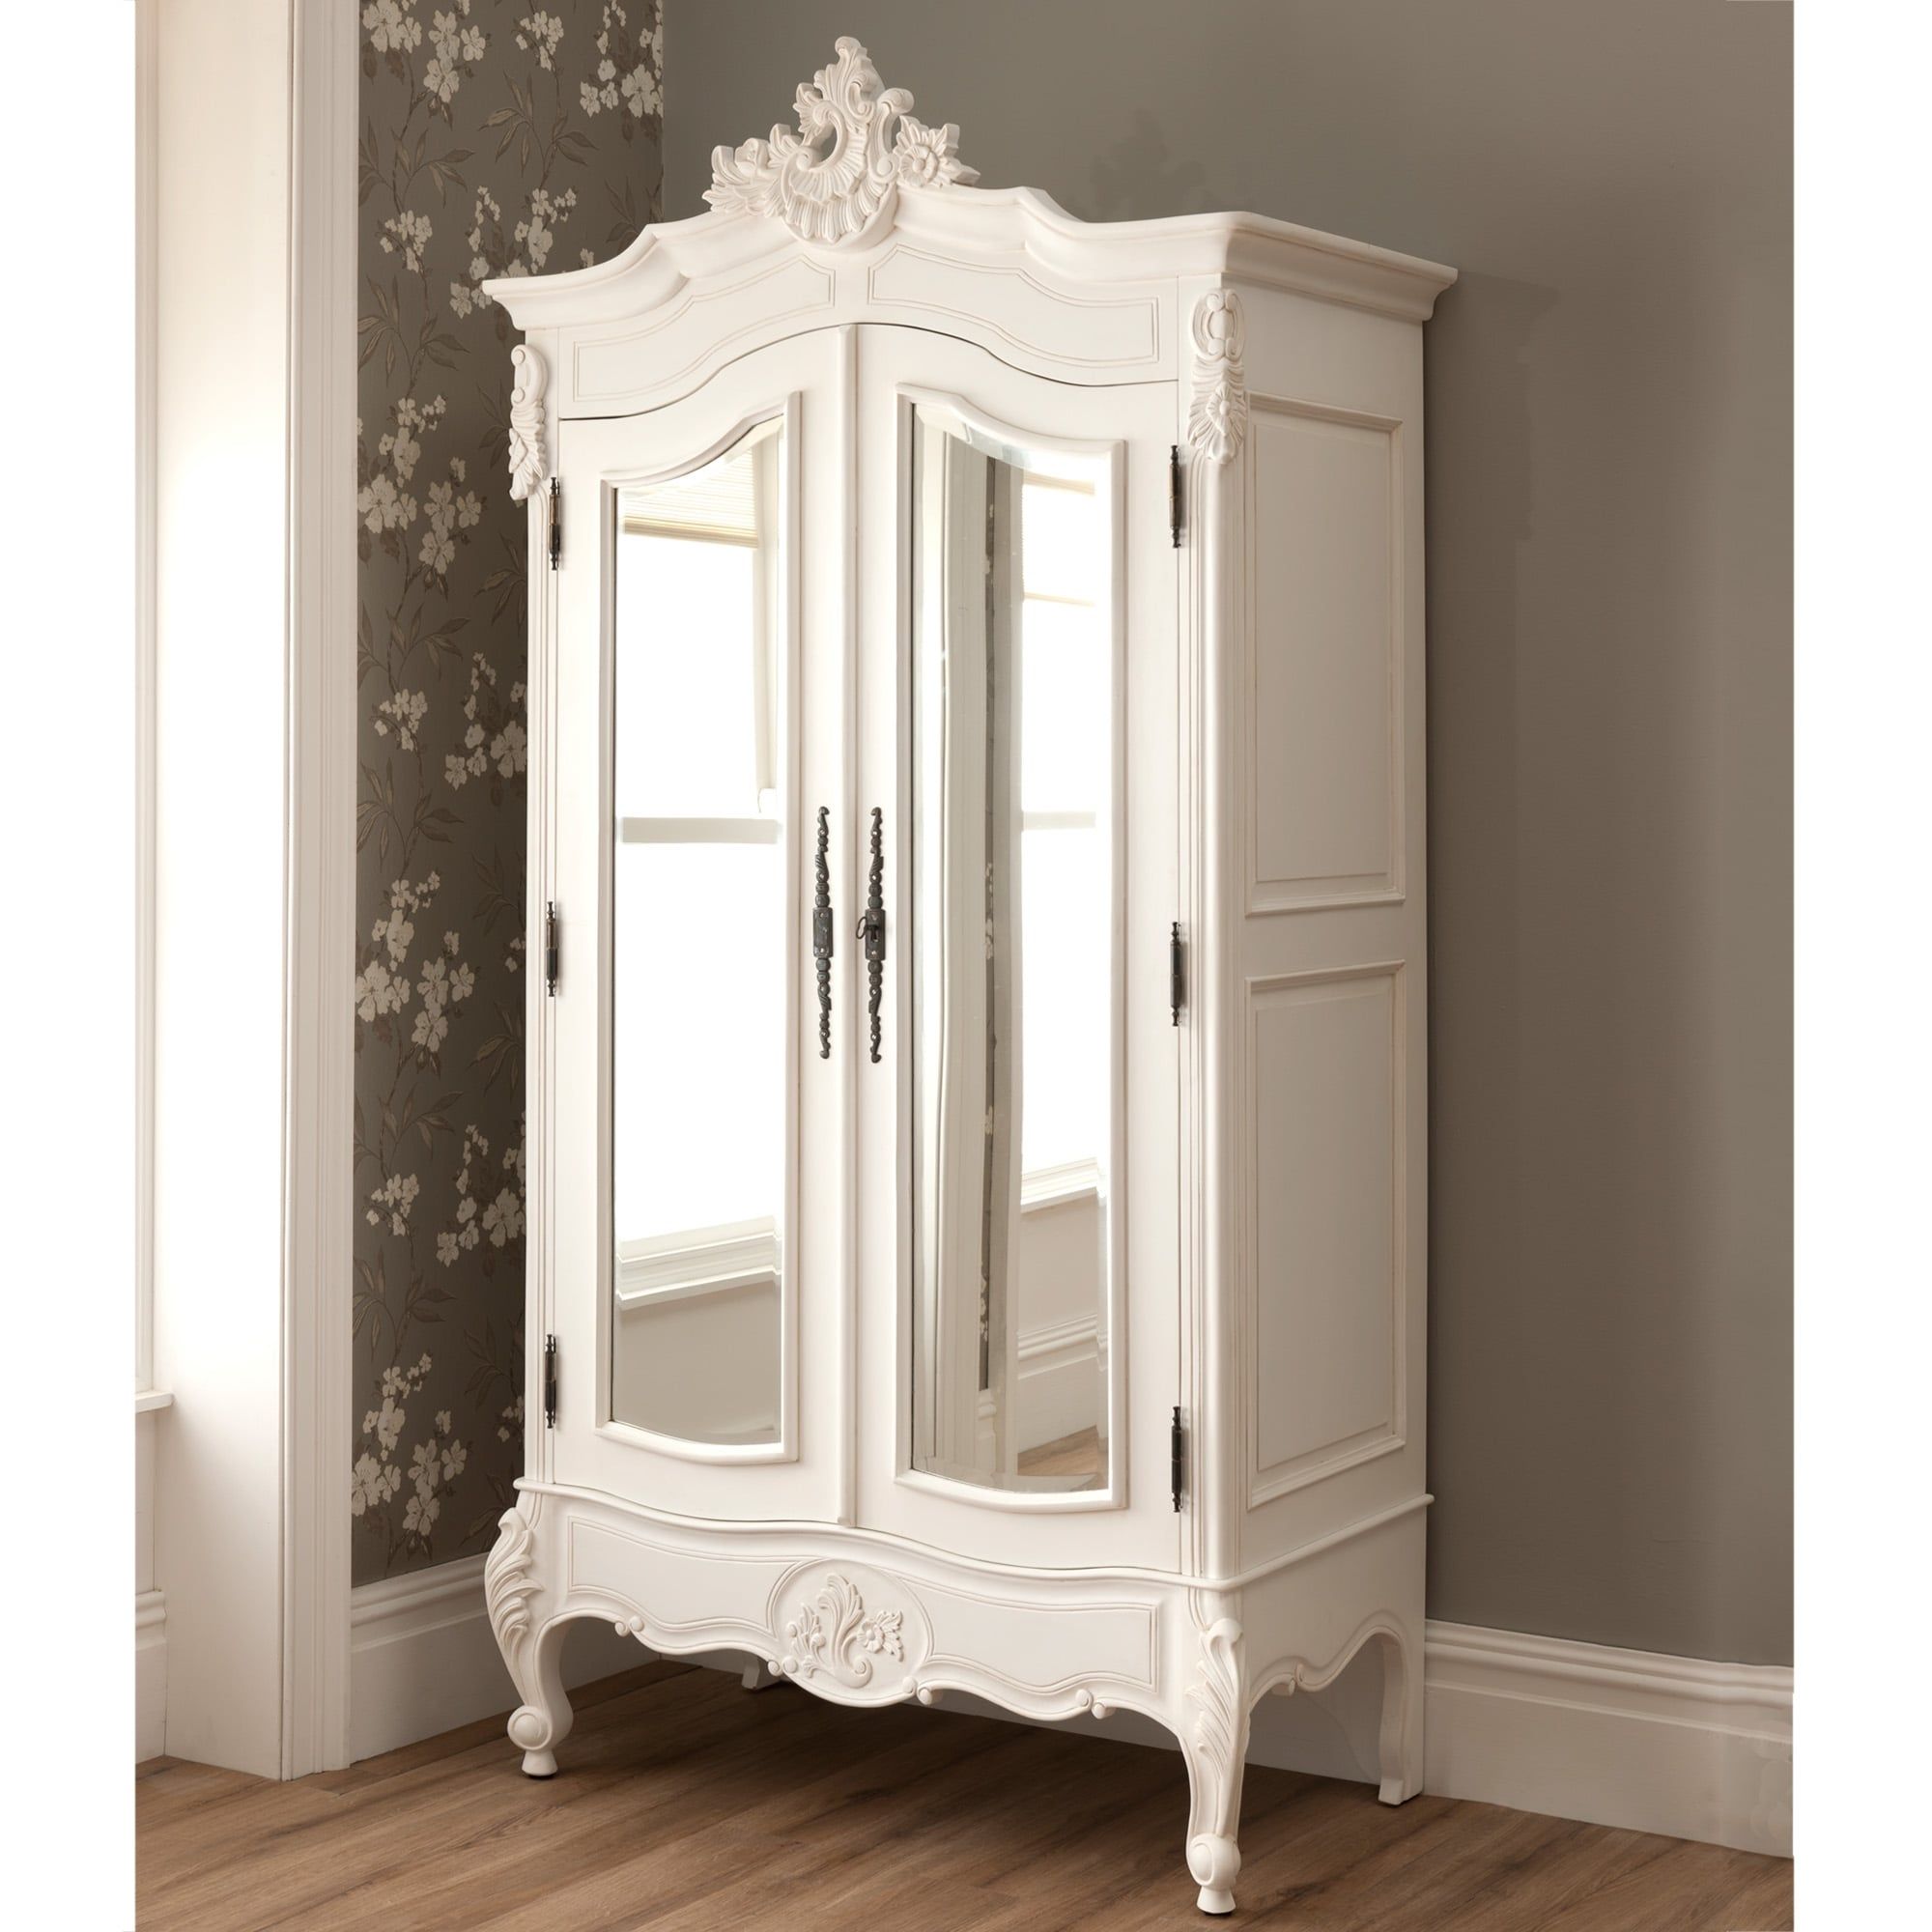 La Rochelle Antique French Mirrored 2 Door Wardrobe For Antique White Wardrobes (View 14 of 15)